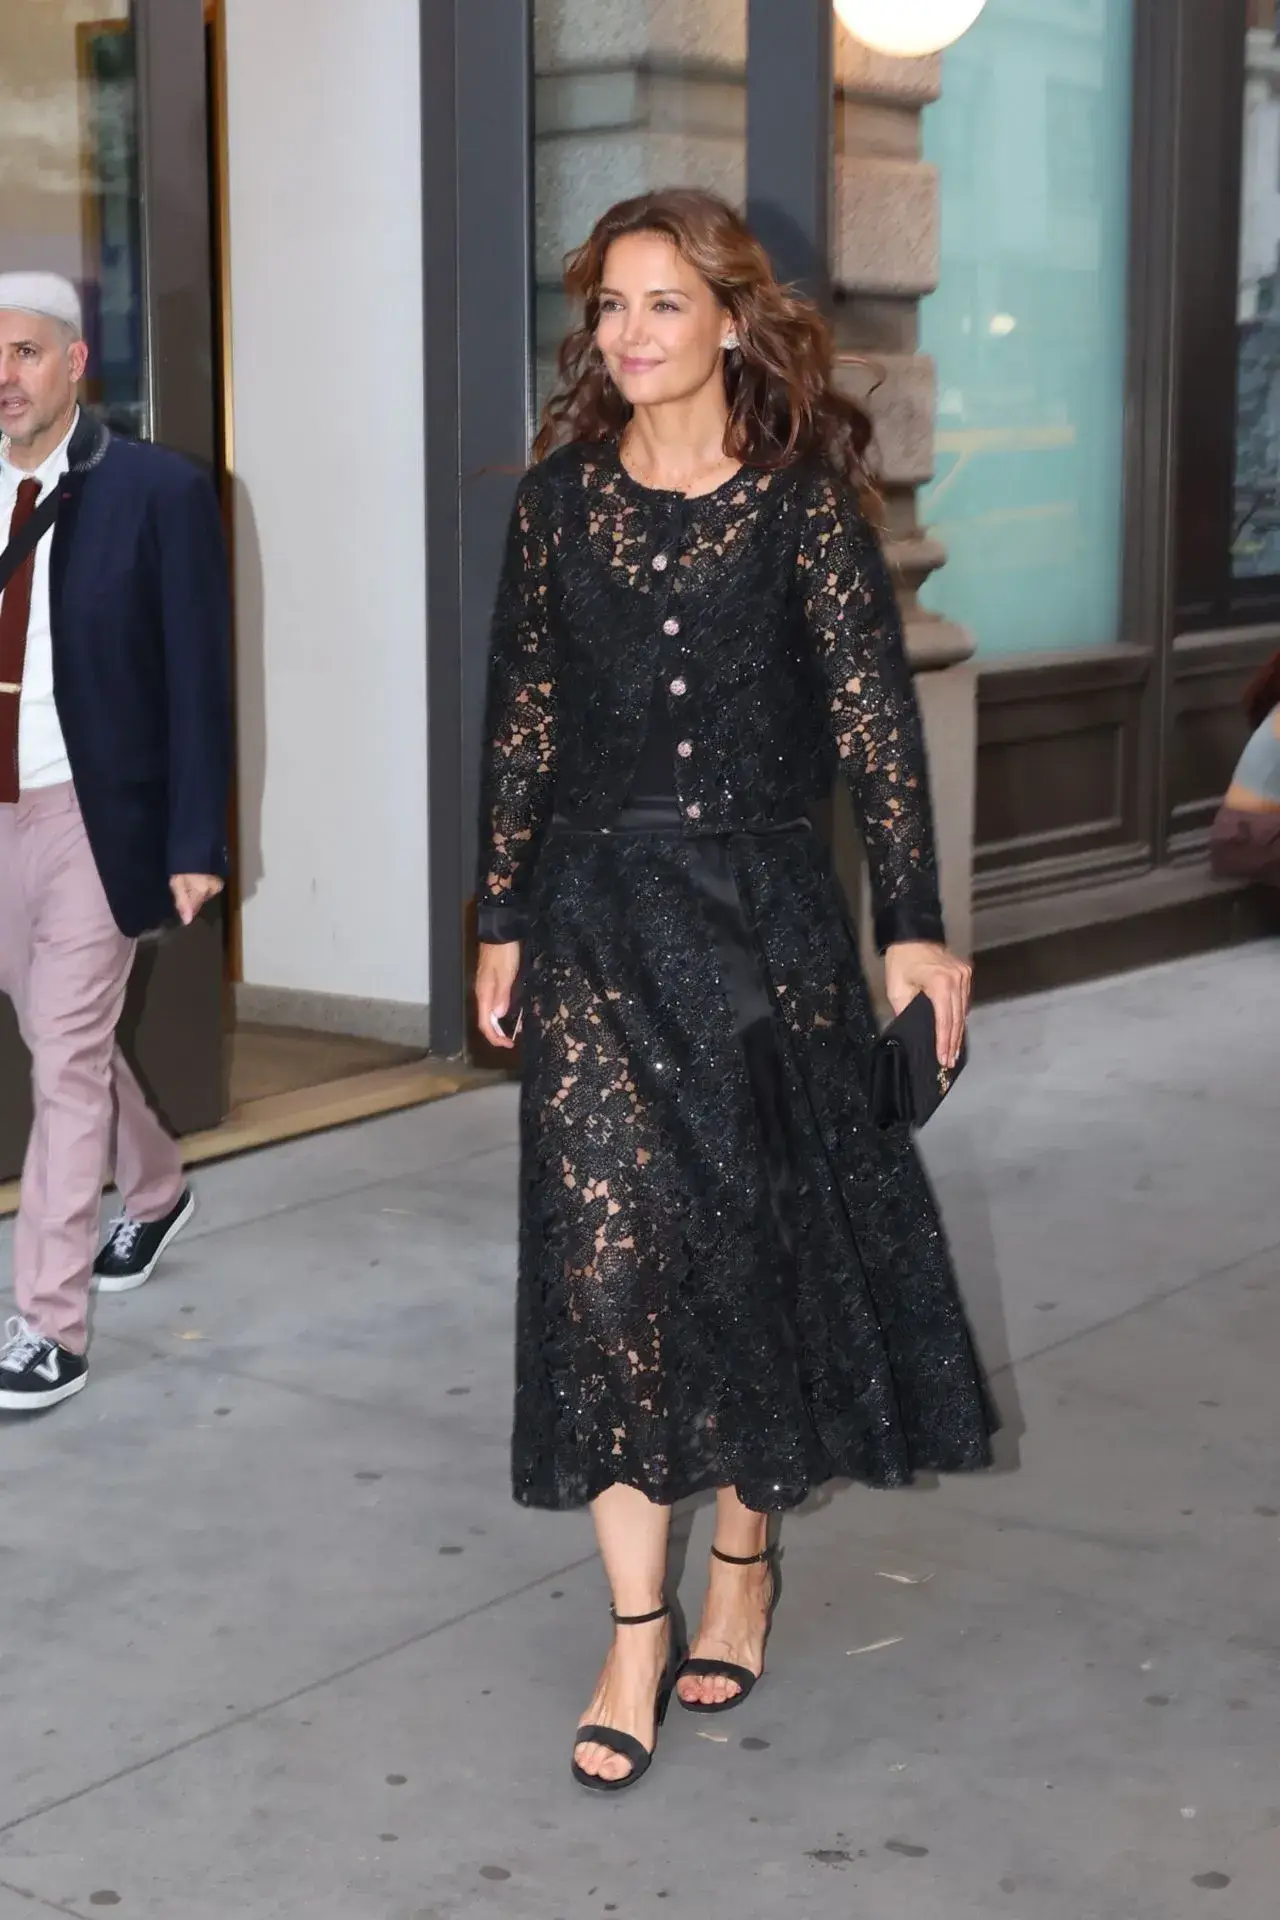 KATIE HOLMES SEEN IN A STUNNING BLACK DRESS IN NEW YORK CITY STREETS 5